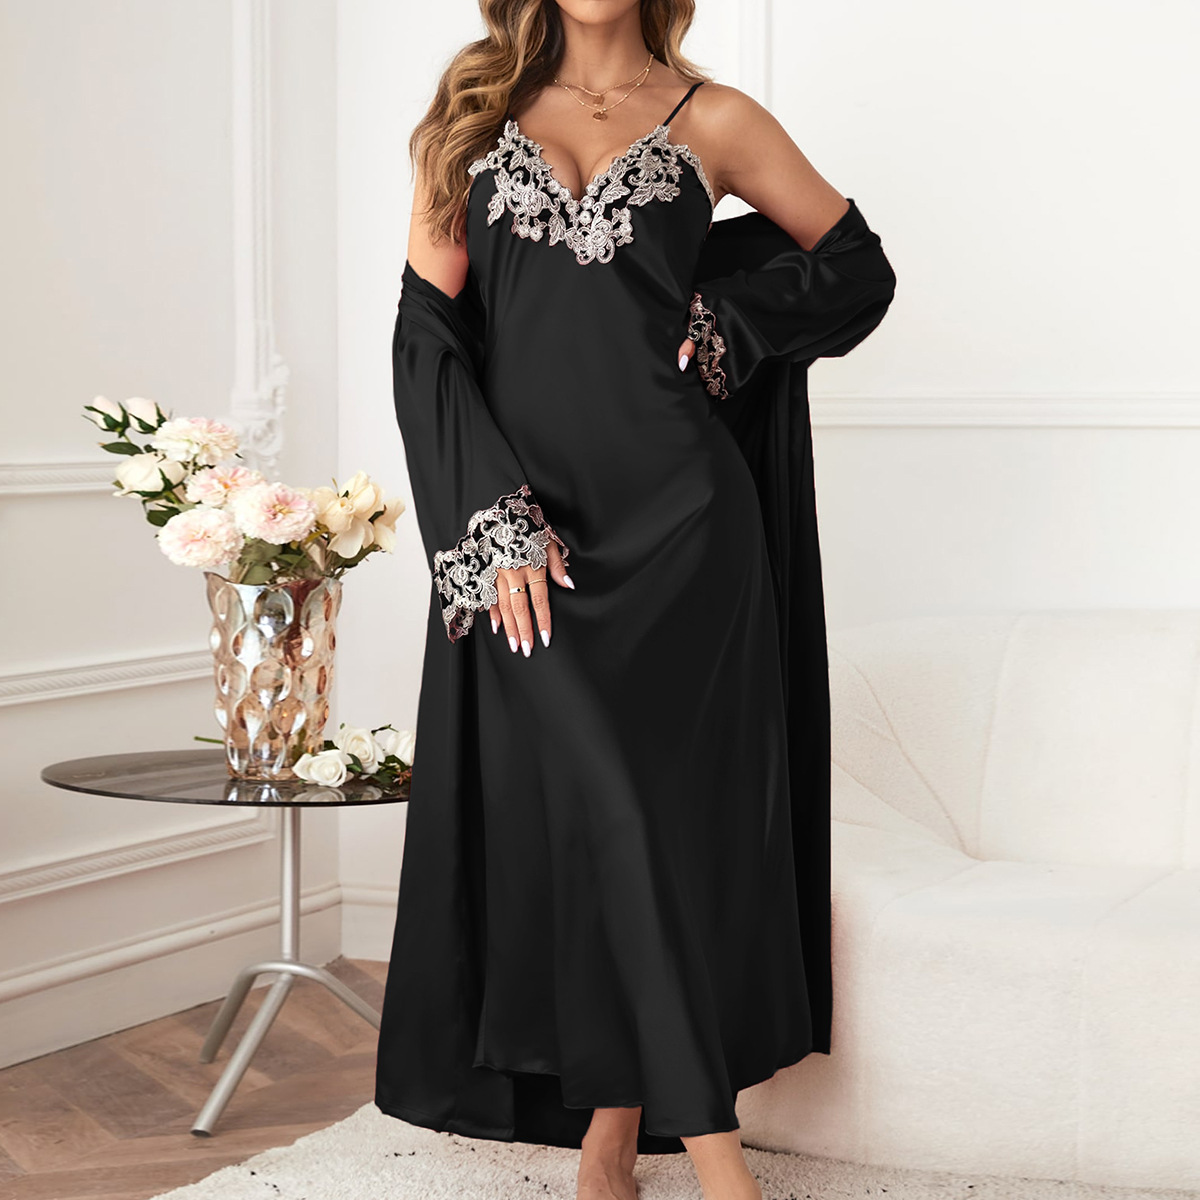 Spring and Autumn Sexy Embroidered Edge Suspender Skirt Outerwear Gown Two-Piece Set Women's Ice Silk Silk Long Dress Lace Bathrobe